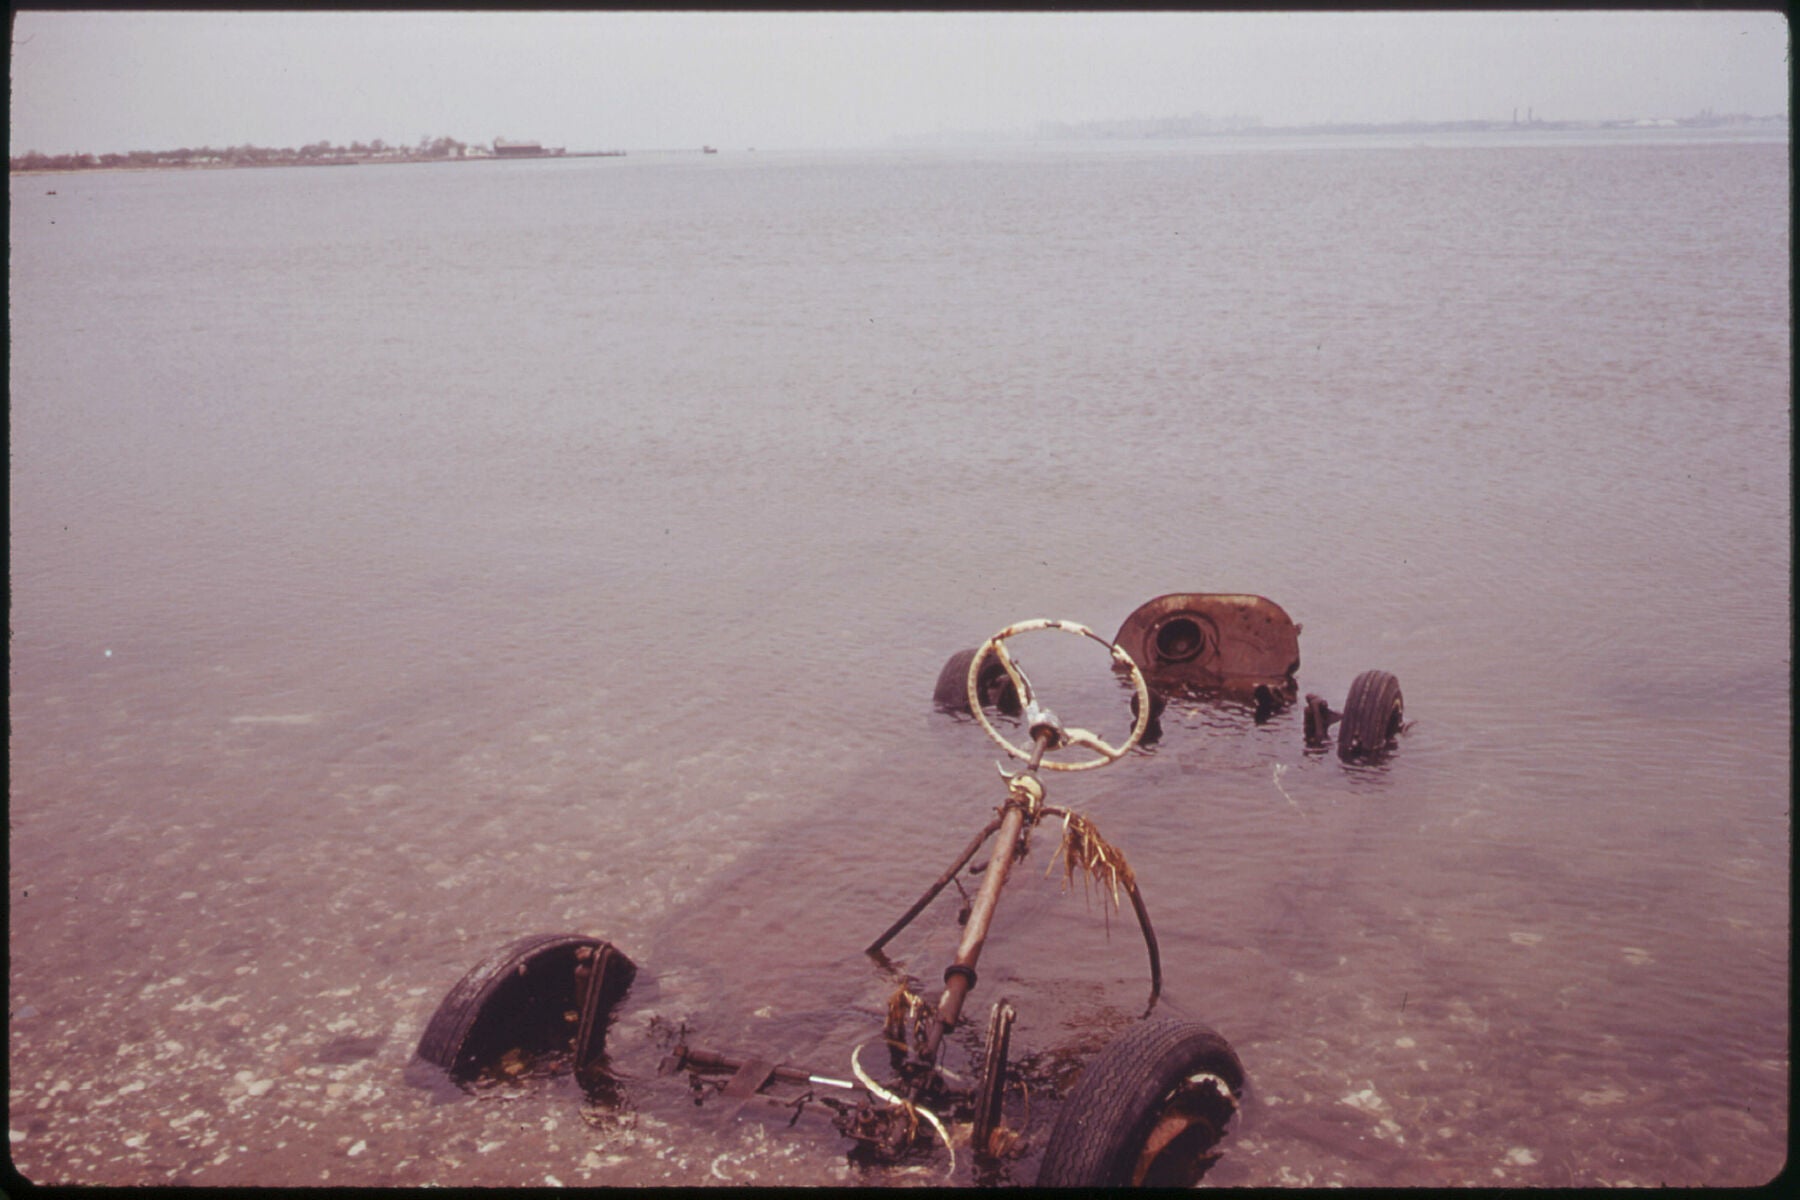 Auto Chassis Submerged in Jamaica Bay Waters near Breezy Point by Arthur Tress - 1973